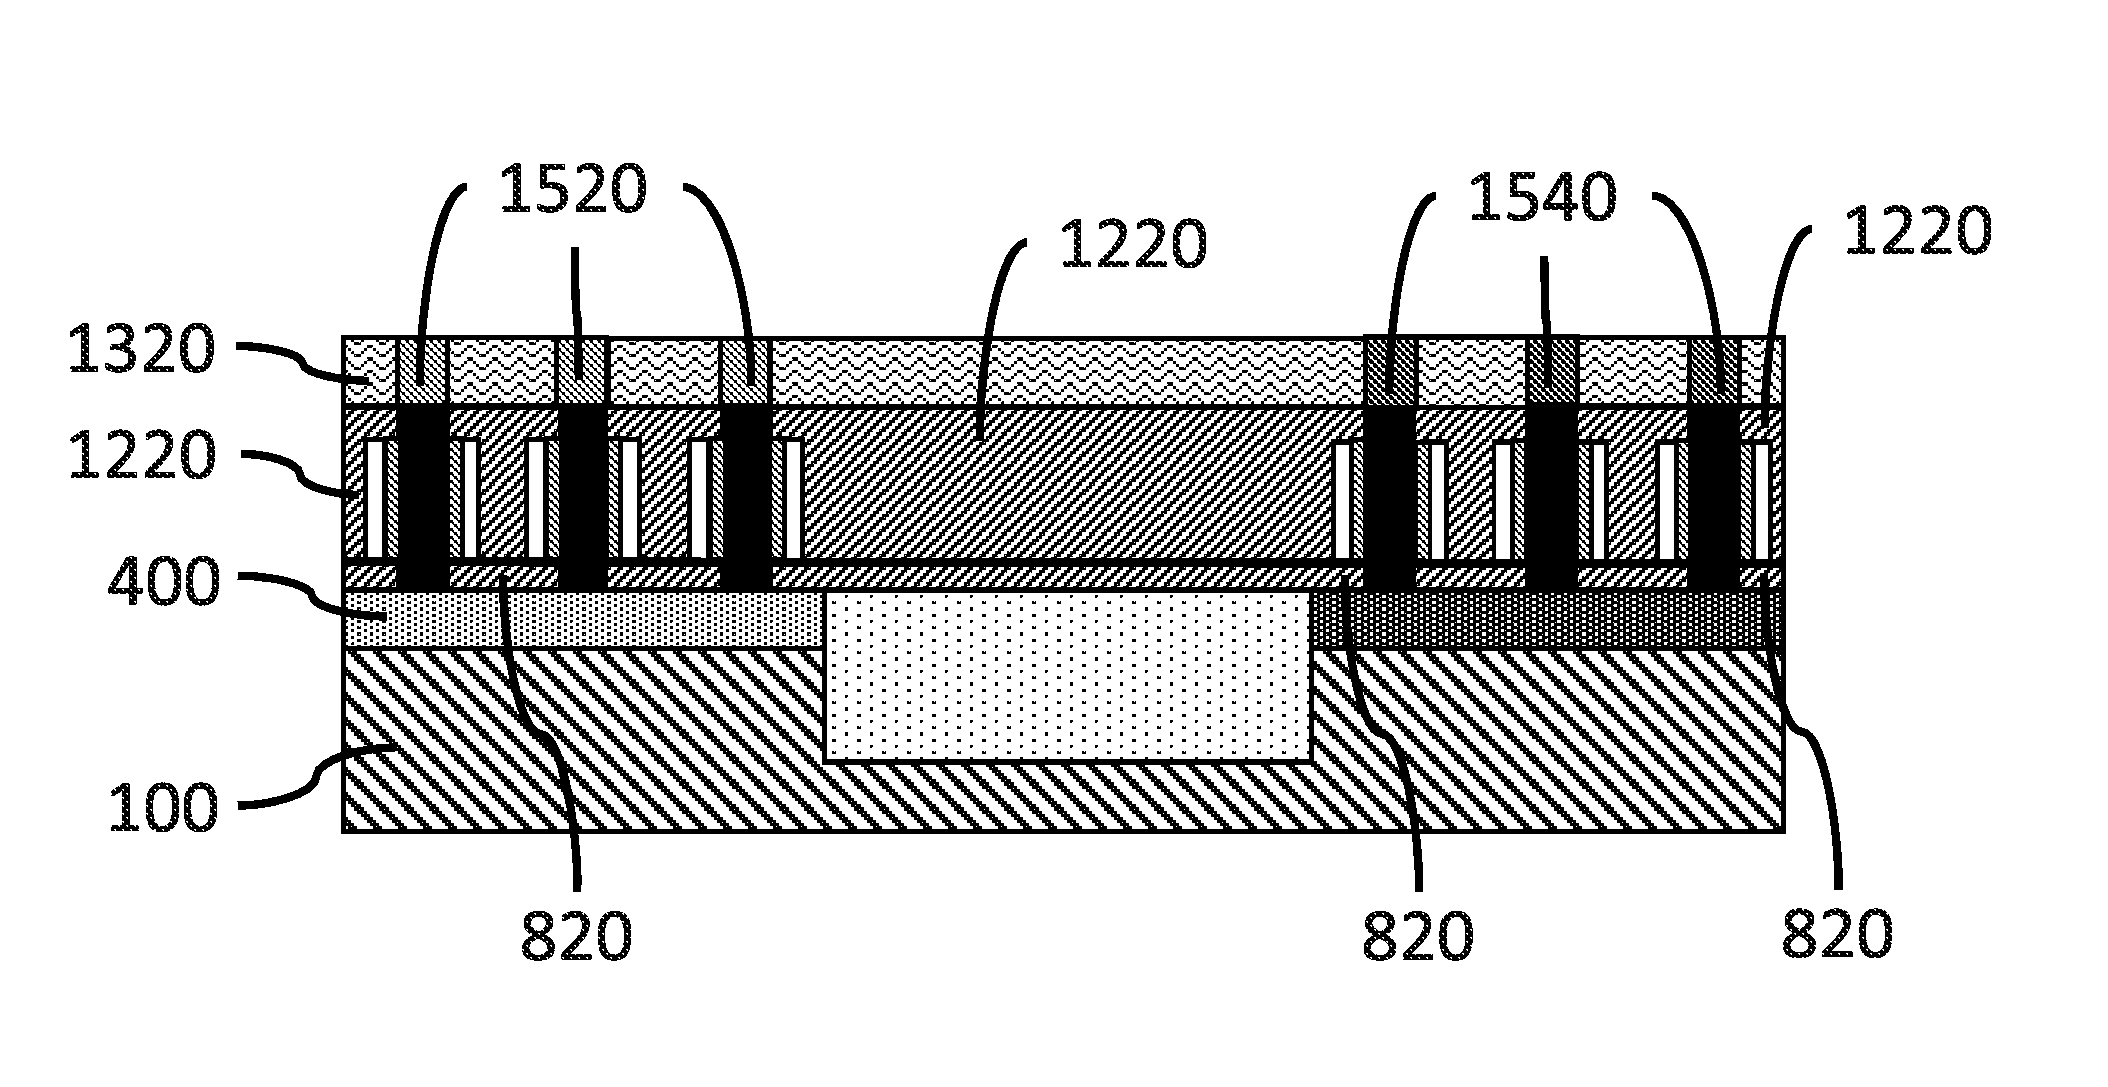 Vertical transistor fabrication and devices